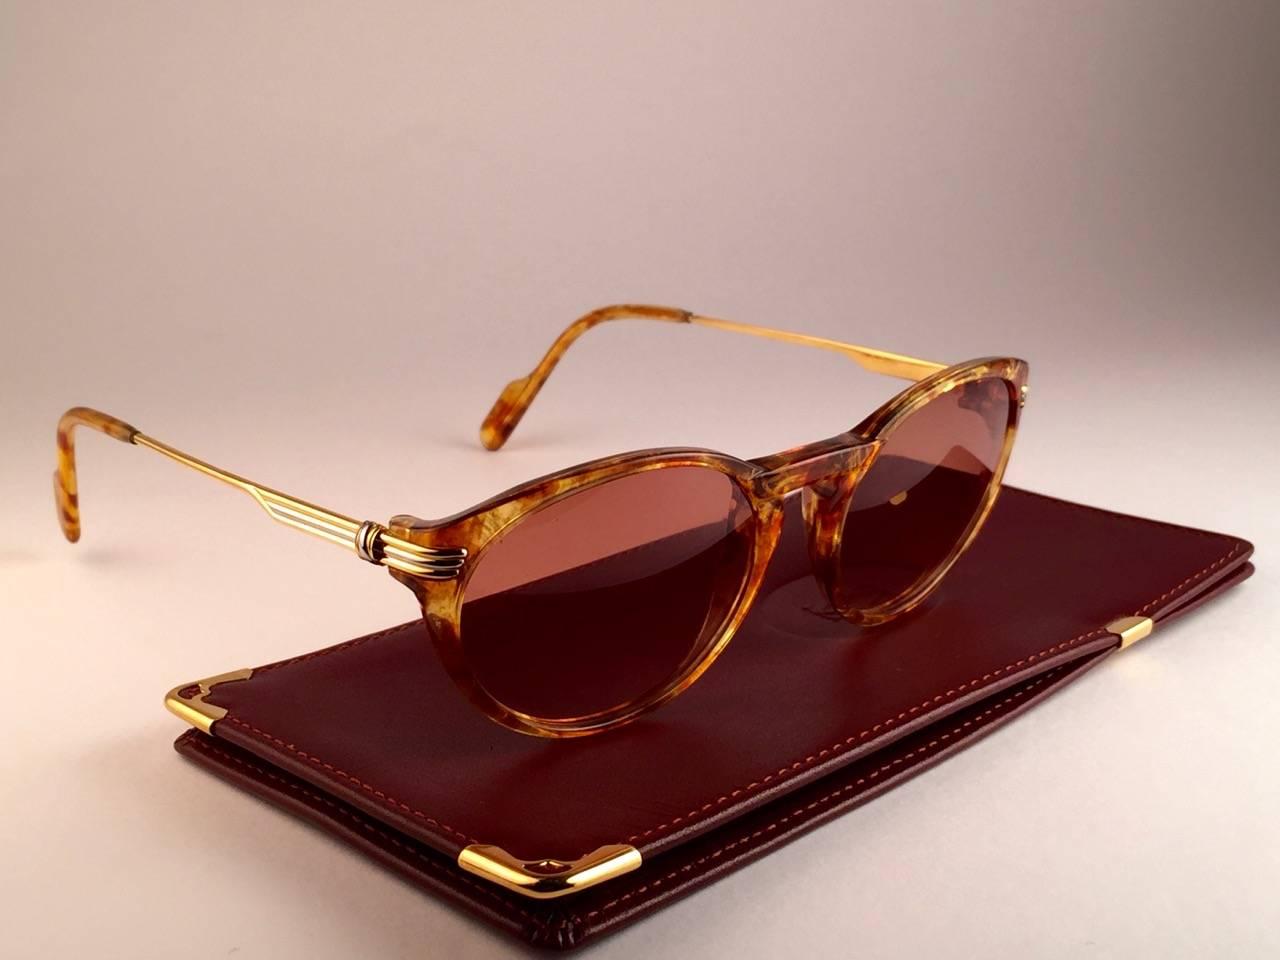 
New Cartier Aurore Classic sunglasses with brown gradient (uv protection) lenses. Small size 50mm/18 frame has the famous real gold and white gold accents on the temples. 100% original. All hallmarks. Cartier gold signs on the earpaddles. These are